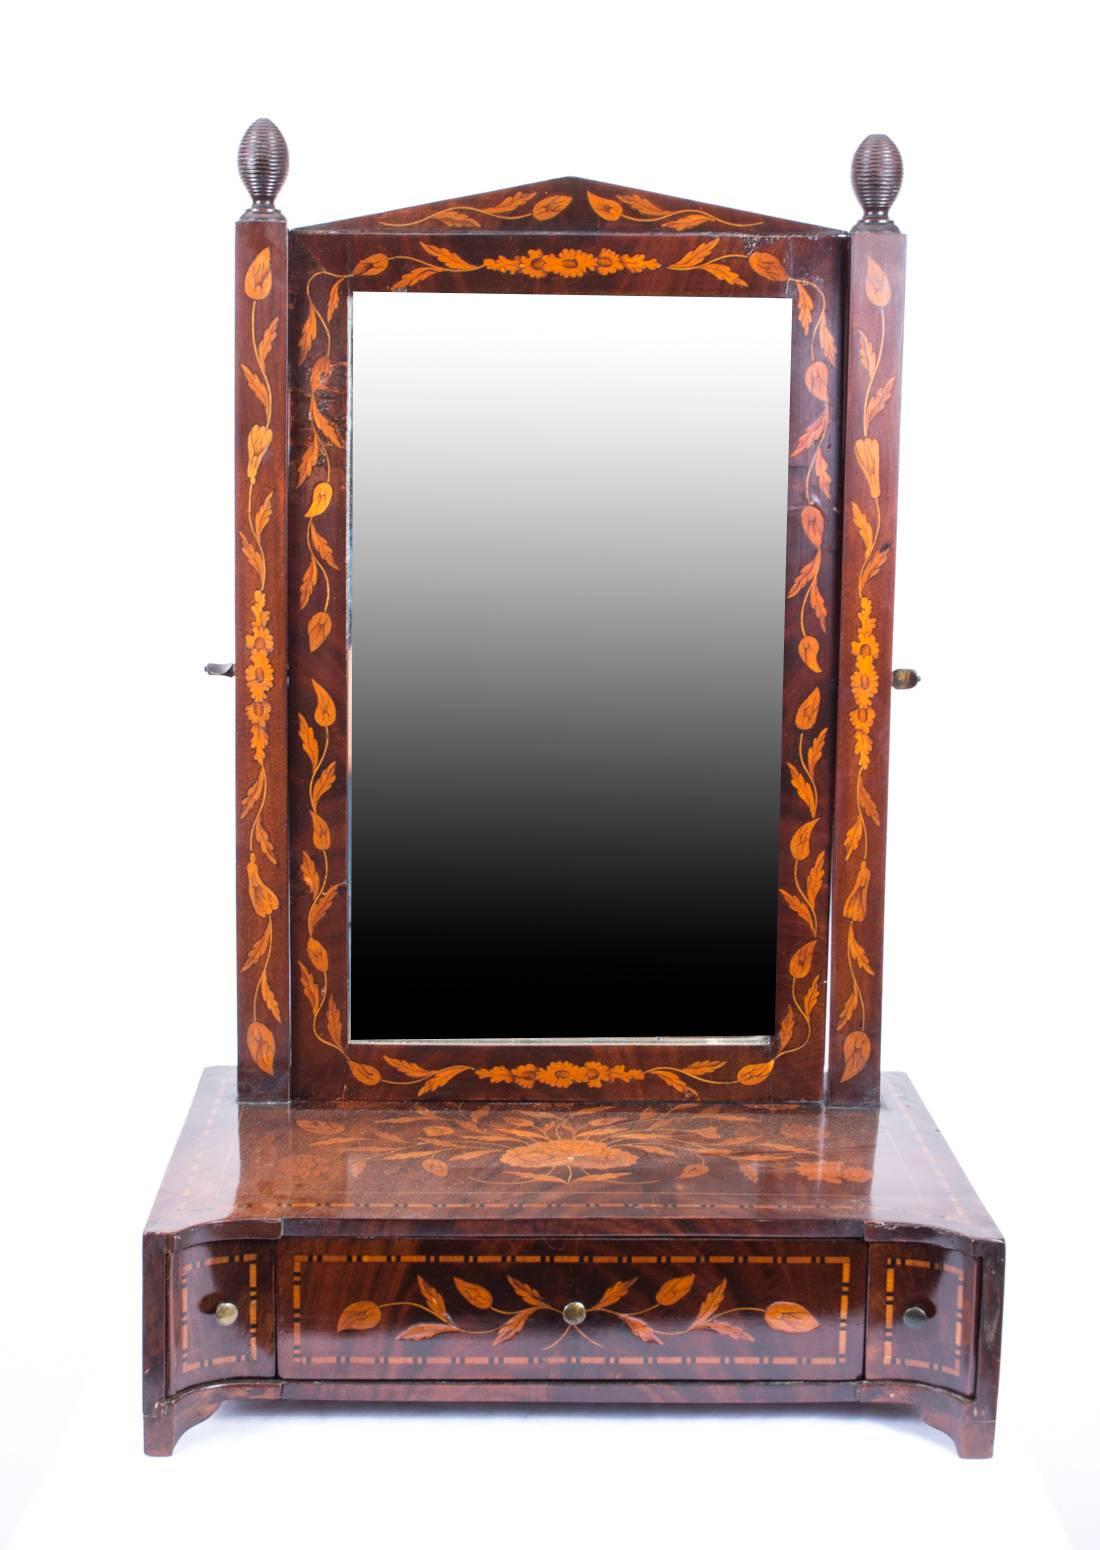 This is a beautiful antique Dutch dressing table mirror, dating from the late 18th century.

It is made from mahogany with exquisite floral marquetry decoration and has a useful drawer for storing your brushes and combs. 

Liven your dressing